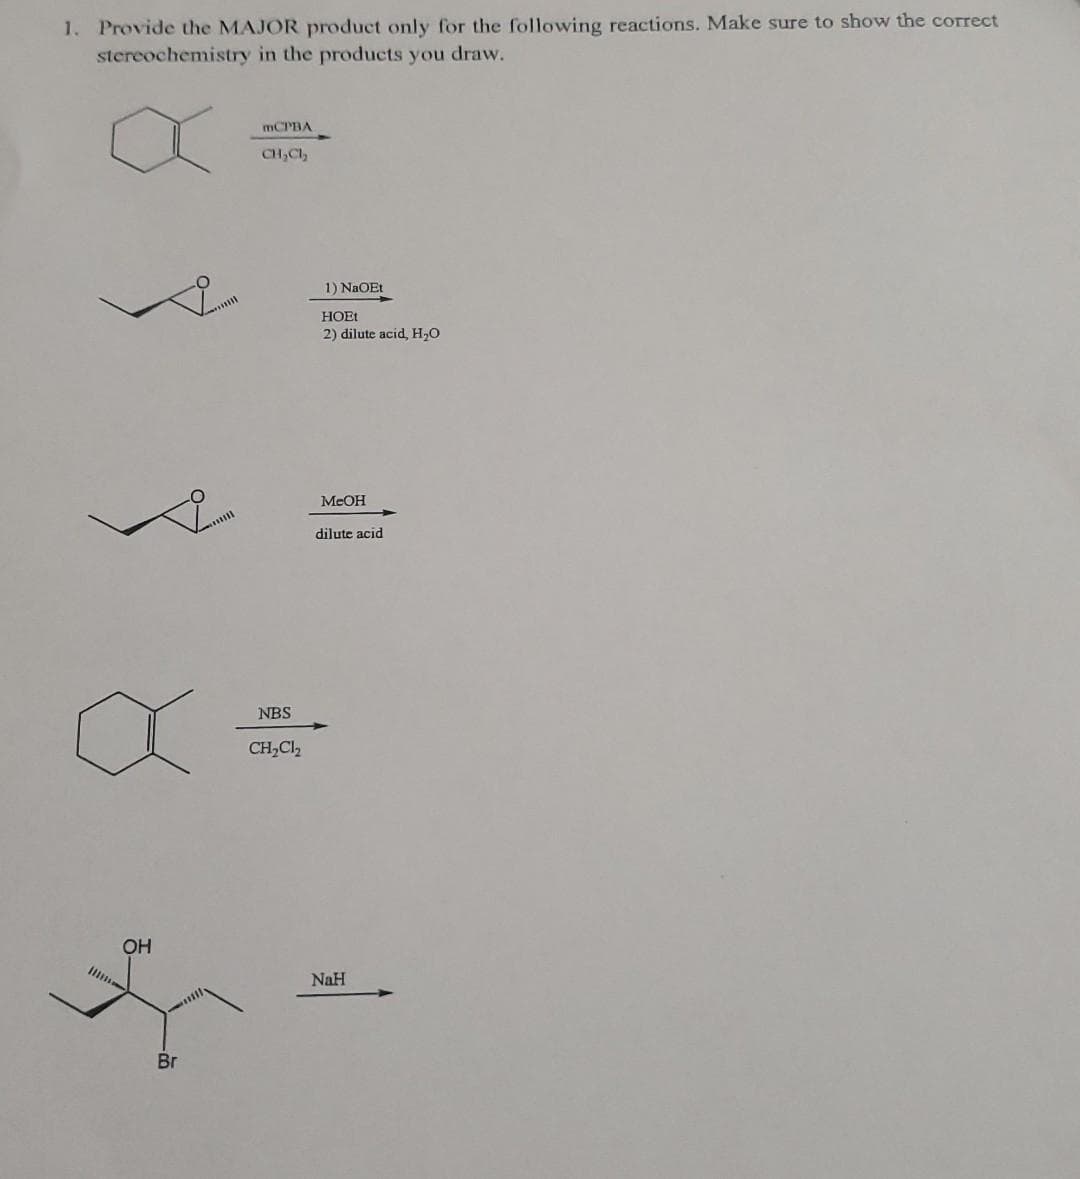 1. Provide the MAJOR product only for the following reactions. Make sure to show the correct
stereochemistry in the products you draw.
mCPBA
CH₂Cl₂
NBS
CH₂Cl₂
OH
*
Br
1) NaOEt
HOEt
2) dilute acid, H₂O
MeOH
dilute acid
NaH